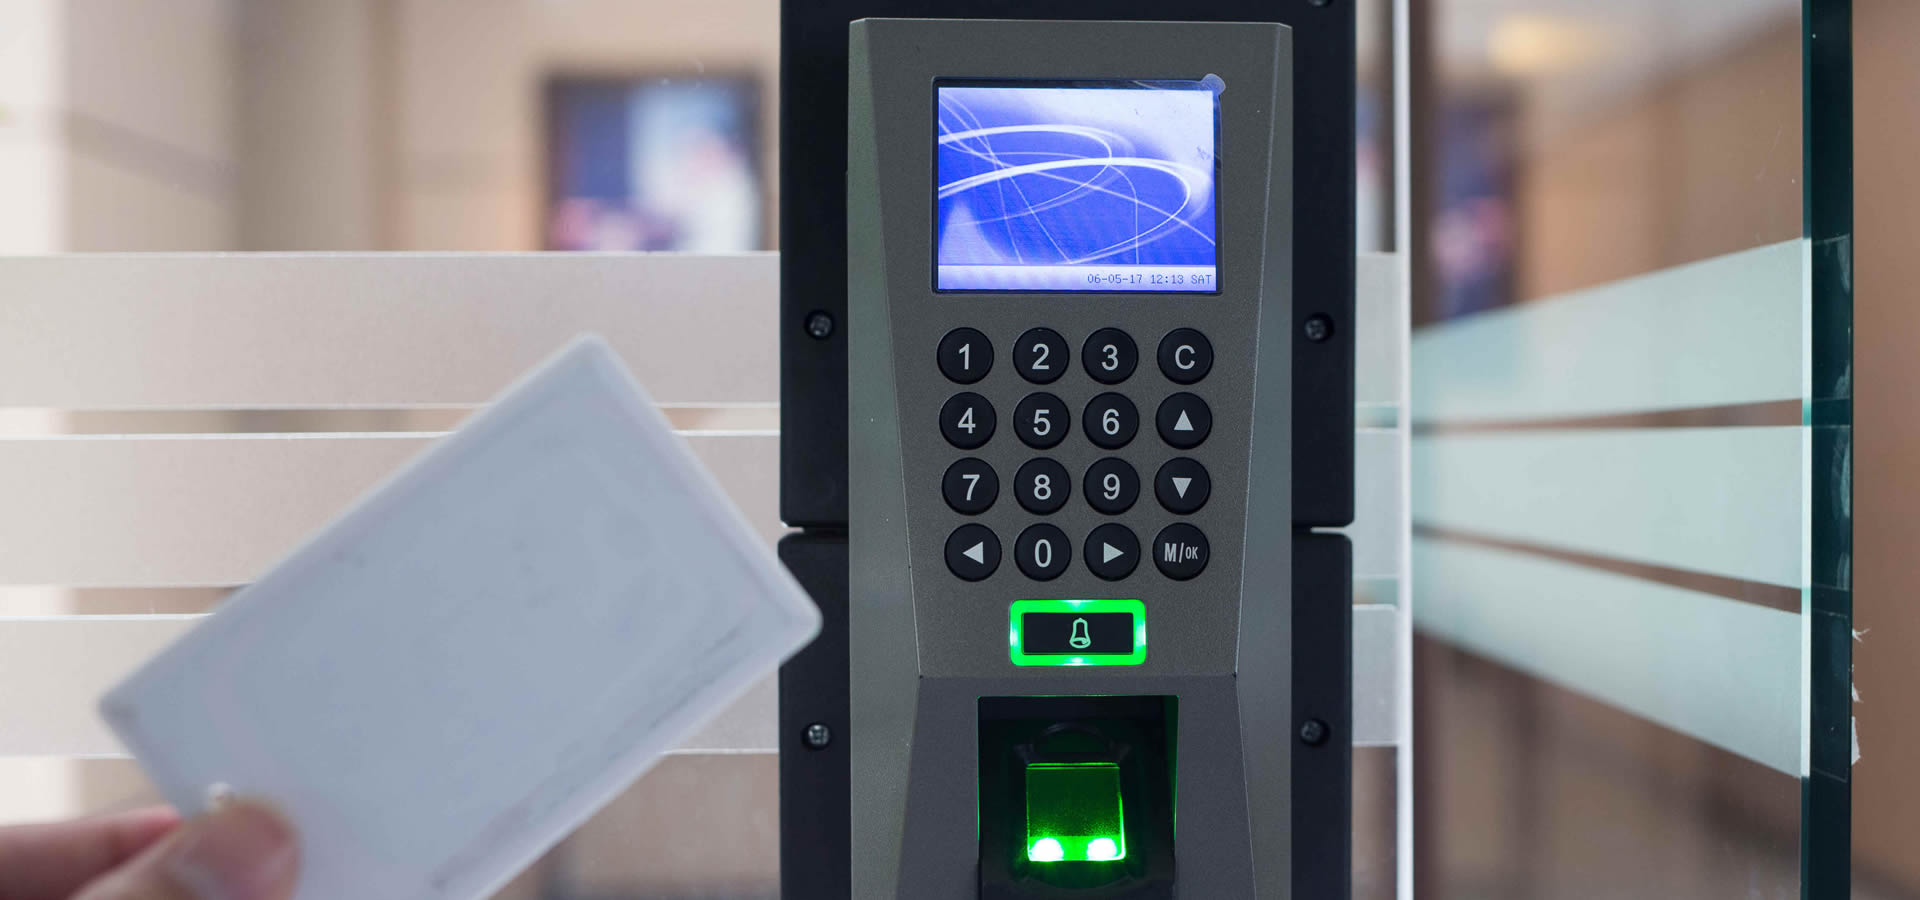 Access control system with keypad and LCD display mounted on glass door